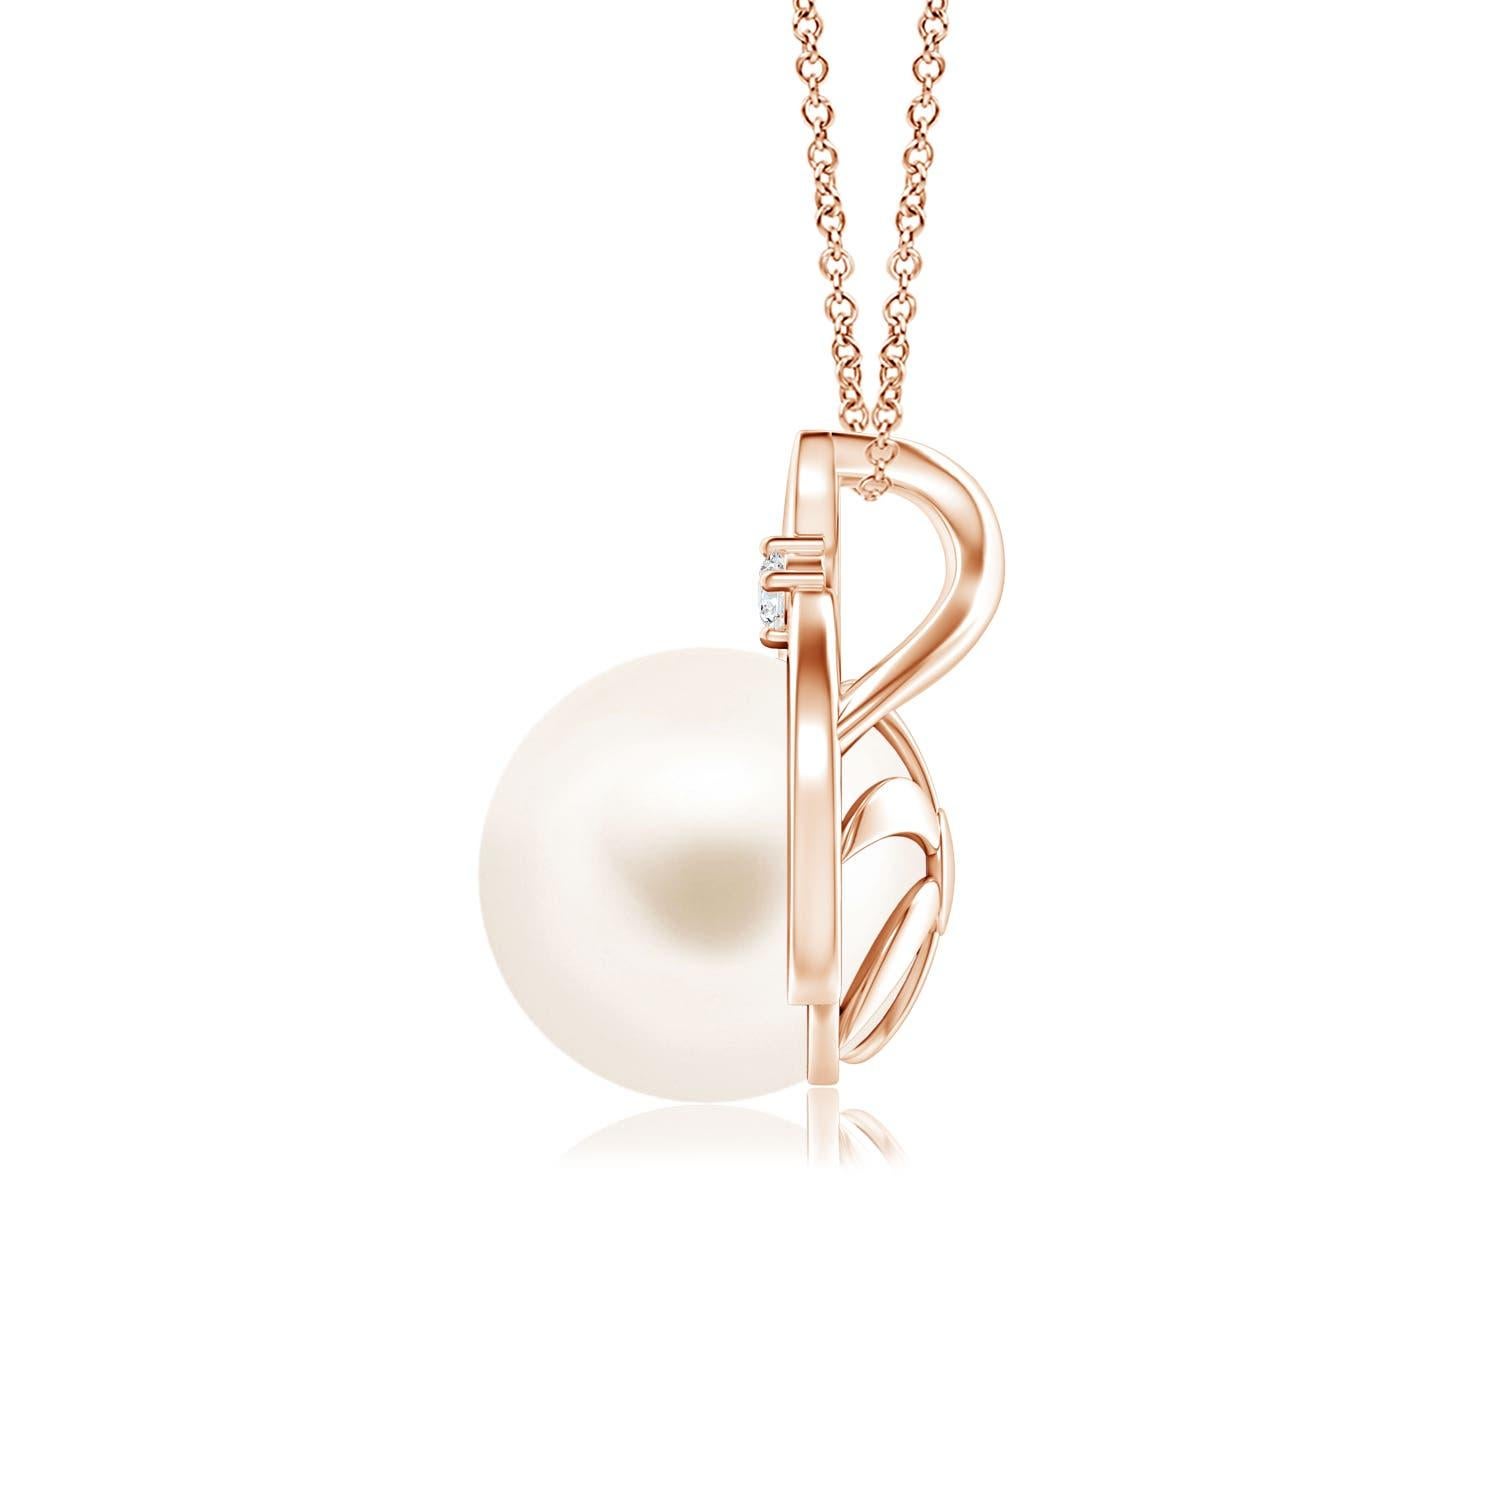 A modern take on the vintage wishbone pattern, this pearl pendant necklace in 14K rose gold is designed to evoke an old-world charm. The intricately set Freshwater cultured pearl looks breathtakingly beautiful. Uniquely designed bale lends a touch